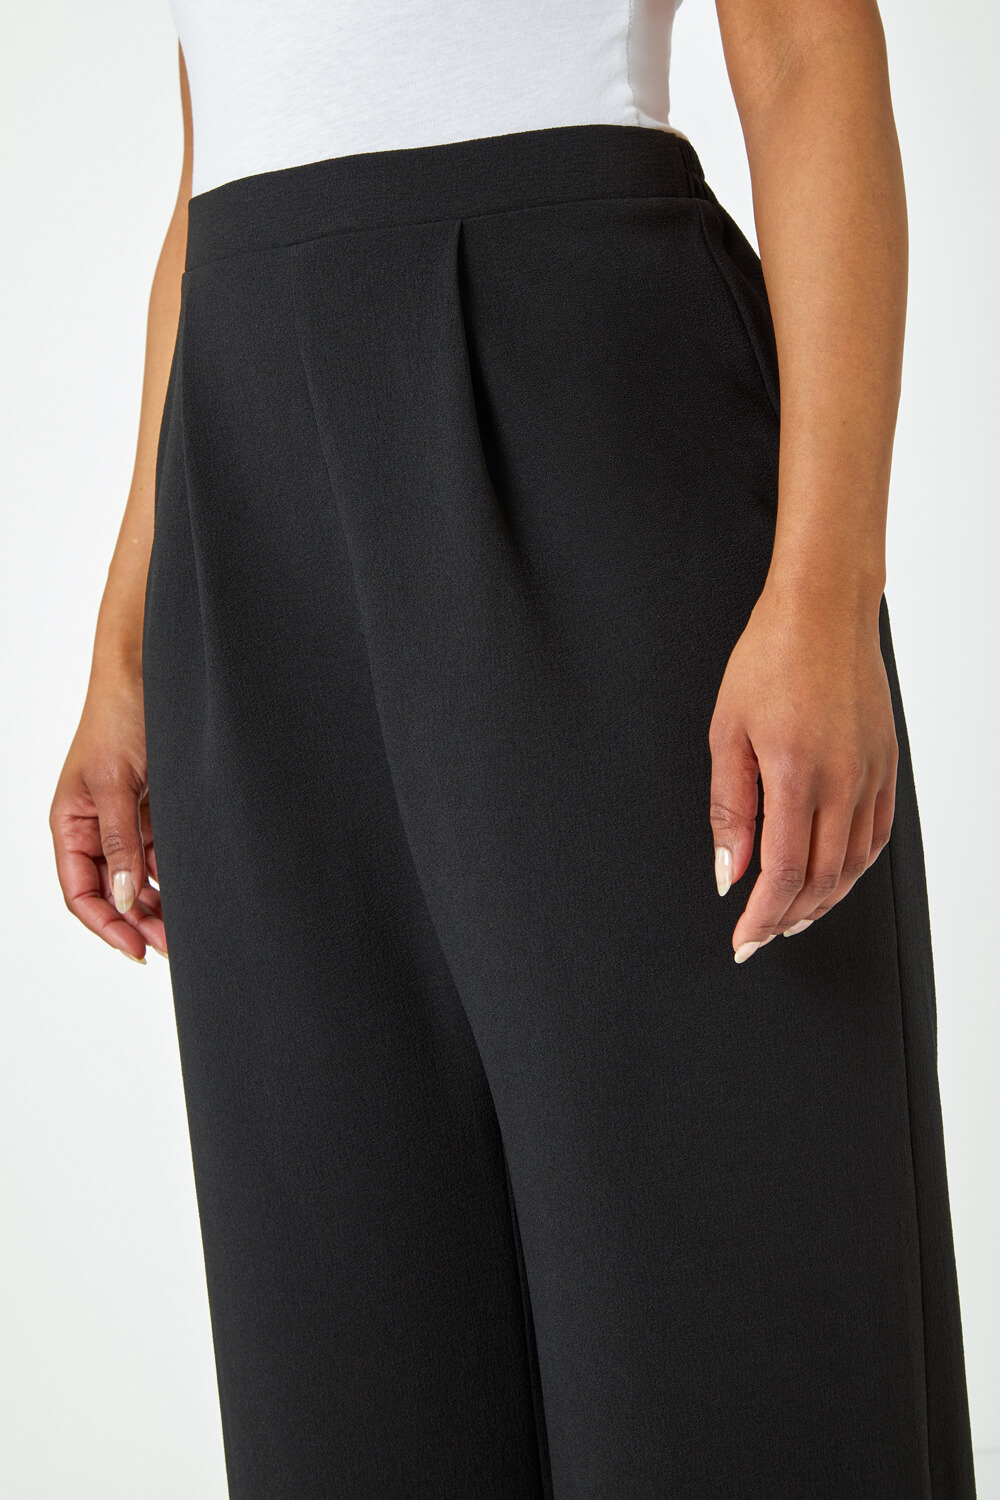 Black Petite Wide Leg Stretch Trousers, Image 5 of 5